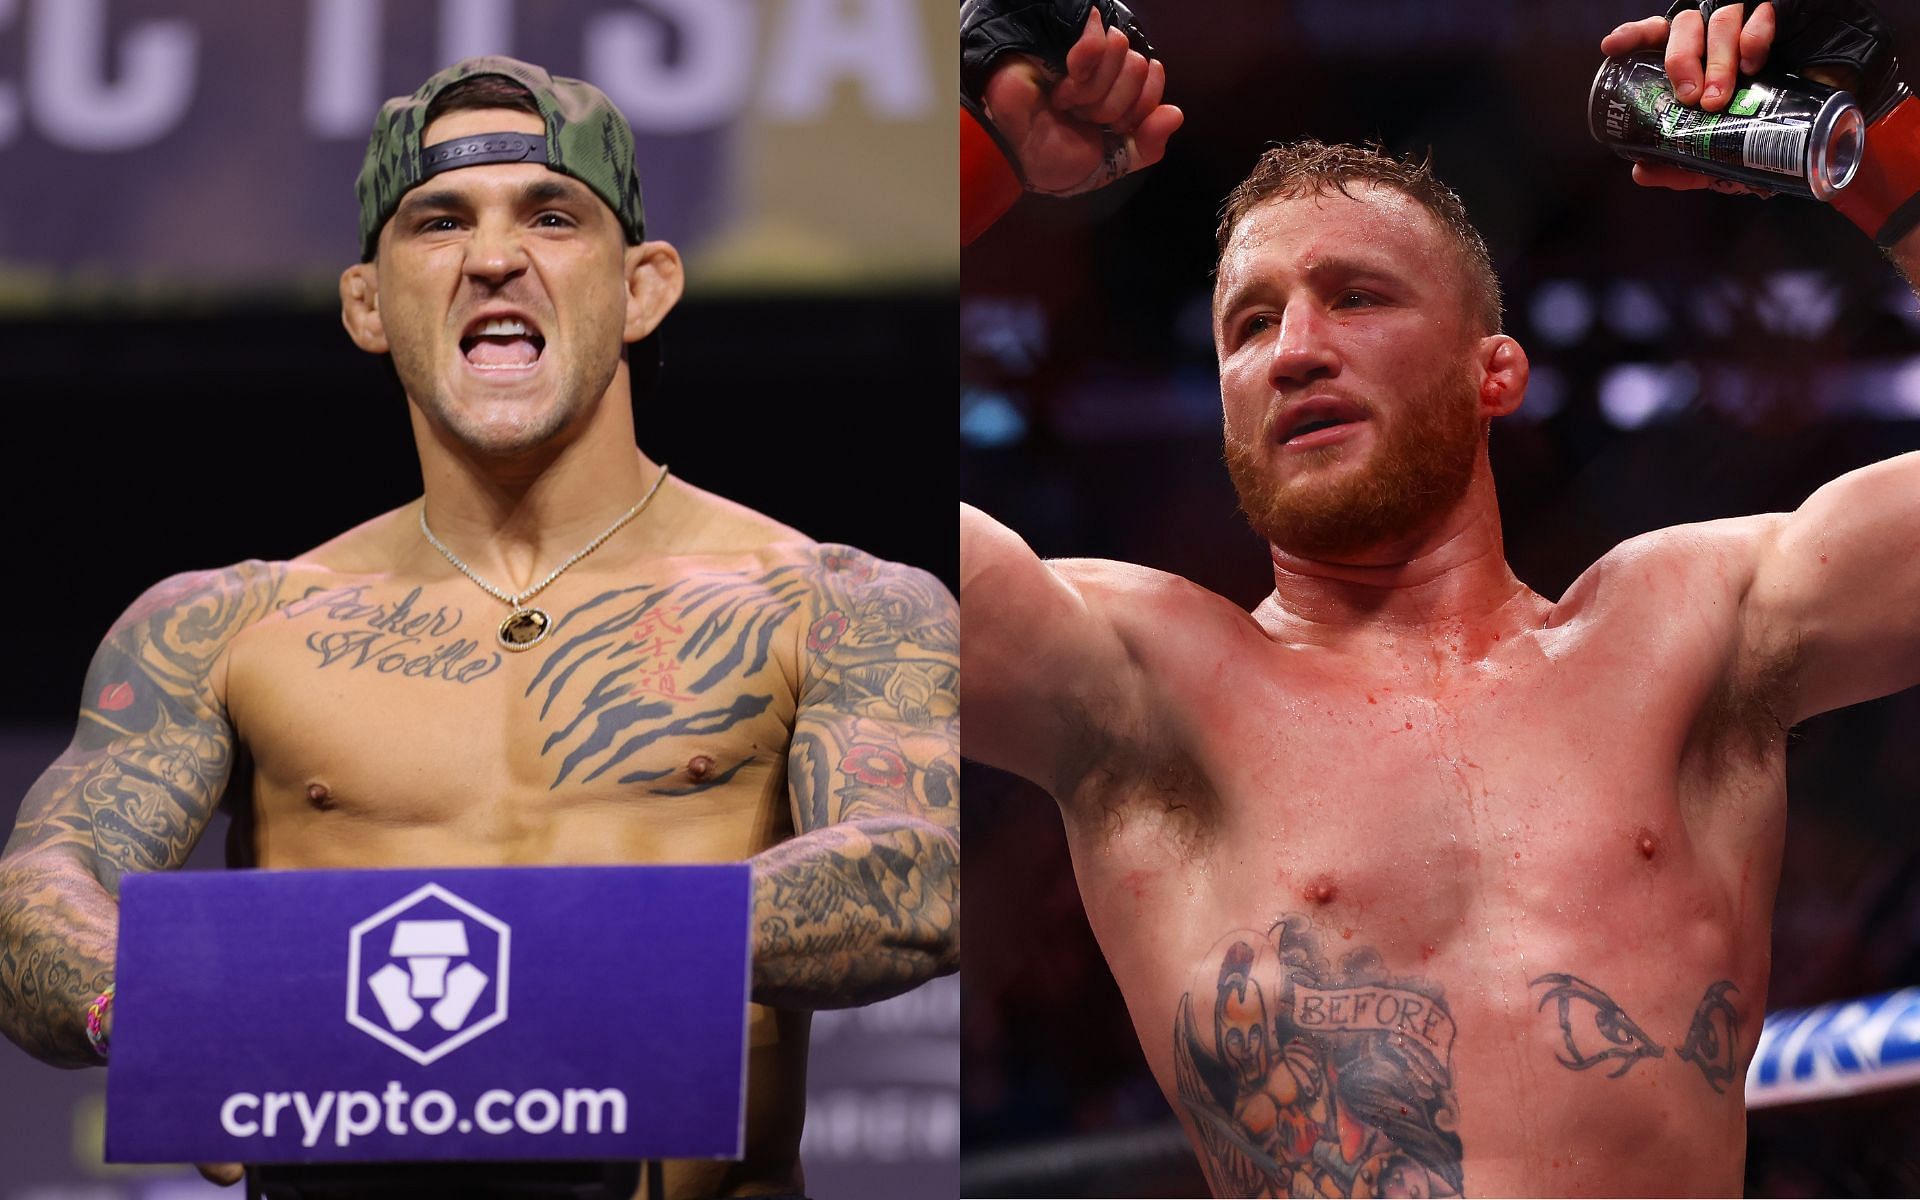 Dustin Poirier (left) and Justin Gaethje (right) (Image credits Getty Images)